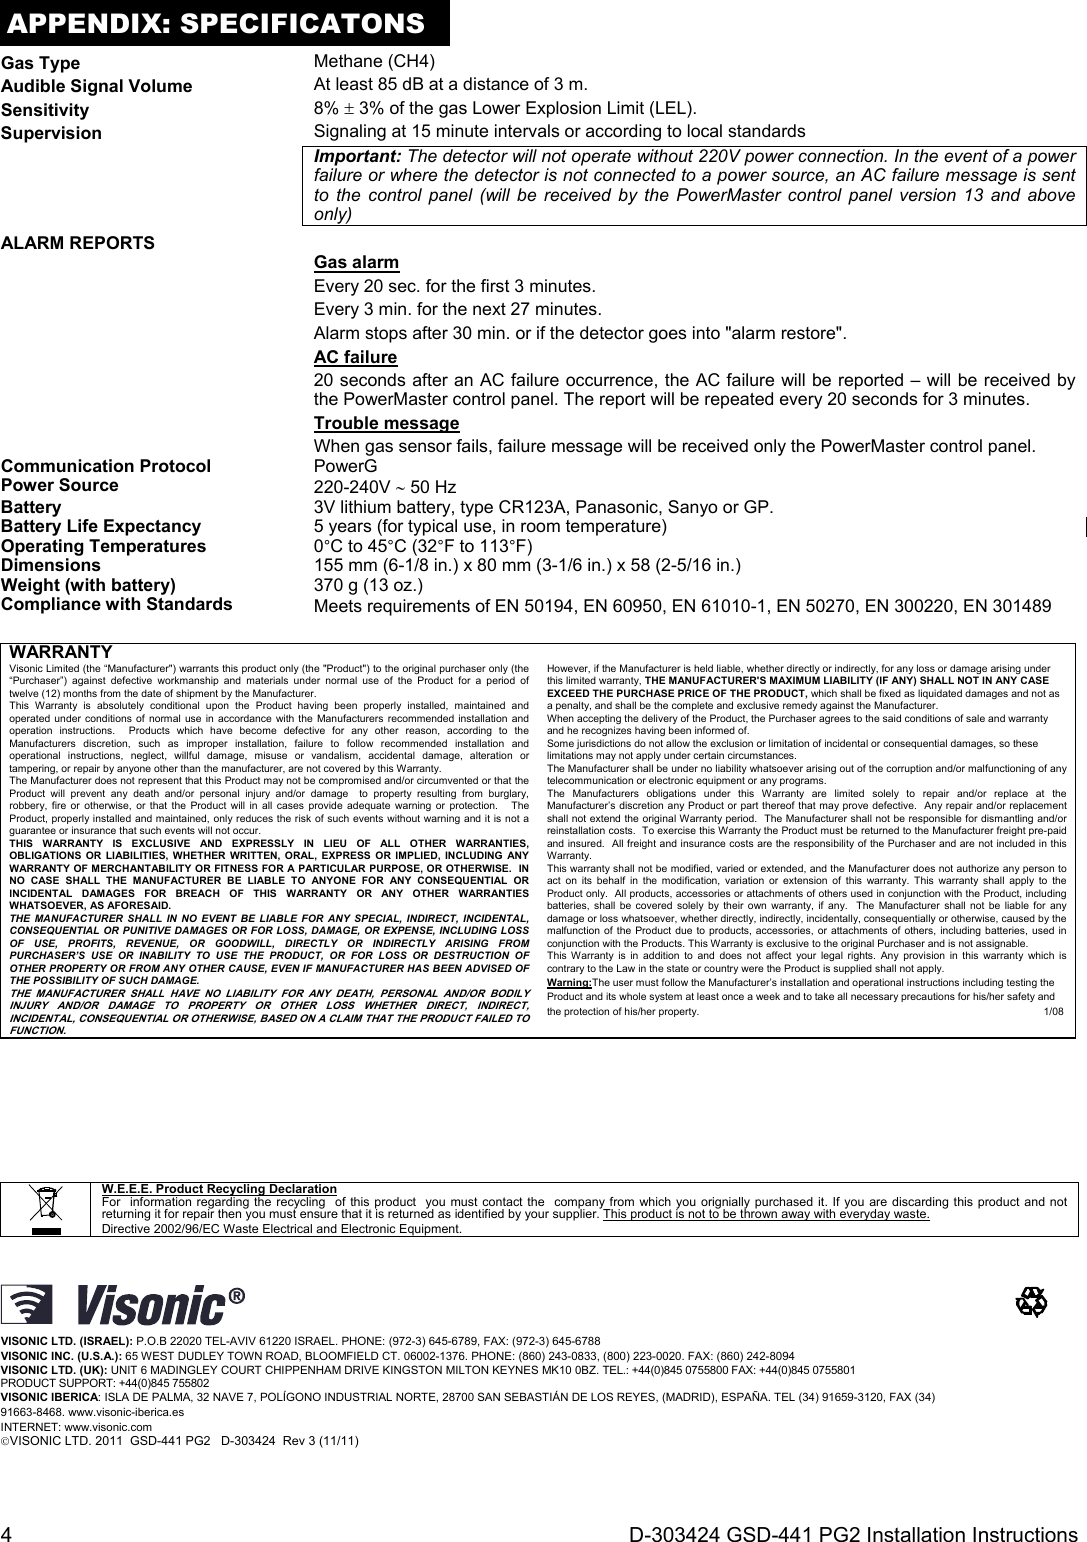 4  D-303424 GSD-441 PG2 Installation Instructions APPENDIX: SPECIFICATONS Gas Type  Methane (CH4)Audible Signal Volume  At least 85 dB at a distance of 3 m. Sensitivity  8%  3% of the gas Lower Explosion Limit (LEL).Supervision   Signaling at 15 minute intervals or according to local standards  Important: The detector will not operate without 220V power connection. In the event of a power failure or where the detector is not connected to a power source, an AC failure message is sent to the control panel (will be received by the PowerMaster control panel version 13 and above only) ALARM REPORTS    Gas alarm Every 20 sec. for the first 3 minutes. Every 3 min. for the next 27 minutes. Alarm stops after 30 min. or if the detector goes into &quot;alarm restore&quot;. AC failure 20 seconds after an AC failure occurrence, the AC failure will be reported – will be received by the PowerMaster control panel. The report will be repeated every 20 seconds for 3 minutes. Trouble message When gas sensor fails, failure message will be received only the PowerMaster control panel. Communication Protocol PowerG Power Source  220-240V  50 Hz Battery   3V lithium battery, type CR123A, Panasonic, Sanyo or GP.Battery Life Expectancy  5 years (for typical use, in room temperature)Operating Temperatures 0°C to 45°C (32°F to 113°F)Dimensions  155 mm (6-1/8 in.) x 80 mm (3-1/6 in.) x 58 (2-5/16 in.)Weight (with battery)  370 g (13 oz.) Compliance with Standards  Meets requirements of EN 50194, EN 60950, EN 61010-1, EN 50270, EN 300220, EN 301489   WARRANTY Visonic Limited (the “Manufacturer&quot;) warrants this product only (the &quot;Product&quot;) to the original purchaser only (the “Purchaser”) against defective workmanship and materials under normal use of the Product for a period of twelve (12) months from the date of shipment by the Manufacturer.   This Warranty is absolutely conditional upon the Product having been properly installed, maintained and operated under conditions of normal use in accordance with the Manufacturers recommended installation and operation instructions.  Products which have become defective for any other reason, according to the Manufacturers discretion, such as improper installation, failure to follow recommended installation and operational instructions, neglect, willful damage, misuse or vandalism, accidental damage, alteration or tampering, or repair by anyone other than the manufacturer, are not covered by this Warranty. The Manufacturer does not represent that this Product may not be compromised and/or circumvented or that the Product will prevent any death and/or personal injury and/or damage  to property resulting from burglary, robbery, fire or otherwise, or that the Product will in all cases provide adequate warning or protection.   The Product, properly installed and maintained, only reduces the risk of such events without warning and it is not a guarantee or insurance that such events will not occur.  THIS WARRANTY IS EXCLUSIVE AND EXPRESSLY IN LIEU OF ALL OTHER WARRANTIES, OBLIGATIONS OR LIABILITIES, WHETHER WRITTEN, ORAL, EXPRESS OR IMPLIED, INCLUDING ANY WARRANTY OF MERCHANTABILITY OR FITNESS FOR A PARTICULAR PURPOSE, OR OTHERWISE.  IN NO CASE SHALL THE MANUFACTURER BE LIABLE TO ANYONE FOR ANY CONSEQUENTIAL OR INCIDENTAL DAMAGES FOR BREACH OF THIS WARRANTY OR ANY OTHER WARRANTIES WHATSOEVER, AS AFORESAID. THE MANUFACTURER SHALL IN NO EVENT BE LIABLE FOR ANY SPECIAL, INDIRECT, INCIDENTAL, CONSEQUENTIAL OR PUNITIVE DAMAGES OR FOR LOSS, DAMAGE, OR EXPENSE, INCLUDING LOSS OF USE, PROFITS, REVENUE, OR GOODWILL, DIRECTLY OR INDIRECTLY ARISING FROM PURCHASER’S USE OR INABILITY TO USE THE PRODUCT, OR FOR LOSS OR DESTRUCTION OF OTHER PROPERTY OR FROM ANY OTHER CAUSE, EVEN IF MANUFACTURER HAS BEEN ADVISED OF THE POSSIBILITY OF SUCH DAMAGE. THE MANUFACTURER SHALL HAVE NO LIABILITY FOR ANY DEATH, PERSONAL AND/OR BODILY INJURY AND/OR DAMAGE TO PROPERTY OR OTHER LOSS WHETHER DIRECT, INDIRECT, INCIDENTAL, CONSEQUENTIAL OR OTHERWISE, BASED ON A CLAIM THAT THE PRODUCT FAILED TO FUNCTION.  However, if the Manufacturer is held liable, whether directly or indirectly, for any loss or damage arising under this limited warranty, THE MANUFACTURER&apos;S MAXIMUM LIABILITY (IF ANY) SHALL NOT IN ANY CASE EXCEED THE PURCHASE PRICE OF THE PRODUCT, which shall be fixed as liquidated damages and not as a penalty, and shall be the complete and exclusive remedy against the Manufacturer.  When accepting the delivery of the Product, the Purchaser agrees to the said conditions of sale and warranty and he recognizes having been informed of. Some jurisdictions do not allow the exclusion or limitation of incidental or consequential damages, so these limitations may not apply under certain circumstances.  The Manufacturer shall be under no liability whatsoever arising out of the corruption and/or malfunctioning of any telecommunication or electronic equipment or any programs. The Manufacturers obligations under this Warranty are limited solely to repair and/or replace at the Manufacturer’s discretion any Product or part thereof that may prove defective.  Any repair and/or replacement shall not extend the original Warranty period.  The Manufacturer shall not be responsible for dismantling and/or reinstallation costs.  To exercise this Warranty the Product must be returned to the Manufacturer freight pre-paid and insured.  All freight and insurance costs are the responsibility of the Purchaser and are not included in this Warranty. This warranty shall not be modified, varied or extended, and the Manufacturer does not authorize any person to act on its behalf in the modification, variation or extension of this warranty. This warranty shall apply to the Product only.  All products, accessories or attachments of others used in conjunction with the Product, including batteries, shall be covered solely by their own warranty, if any.  The Manufacturer shall not be liable for any damage or loss whatsoever, whether directly, indirectly, incidentally, consequentially or otherwise, caused by the malfunction of the Product due to products, accessories, or attachments of others, including batteries, used in conjunction with the Products. This Warranty is exclusive to the original Purchaser and is not assignable.  This Warranty is in addition to and does not affect your legal rights. Any provision in this warranty which is contrary to the Law in the state or country were the Product is supplied shall not apply.  Warning:The user must follow the Manufacturer’s installation and operational instructions including testing the Product and its whole system at least once a week and to take all necessary precautions for his/her safety and the protection of his/her property.                1/08                                                                       W.E.E.E. Product Recycling Declaration For  information regarding the recycling  of this product  you must contact the  company from which you orignially purchased it. If you are discarding this product and not returning it for repair then you must ensure that it is returned as identified by your supplier. This product is not to be thrown away with everyday waste. Directive 2002/96/EC Waste Electrical and Electronic Equipment.   VISONIC LTD. (ISRAEL): P.O.B 22020 TEL-AVIV 61220 ISRAEL. PHONE: (972-3) 645-6789, FAX: (972-3) 645-6788 VISONIC INC. (U.S.A.): 65 WEST DUDLEY TOWN ROAD, BLOOMFIELD CT. 06002-1376. PHONE: (860) 243-0833, (800) 223-0020. FAX: (860) 242-8094 VISONIC LTD. (UK): UNIT 6 MADINGLEY COURT CHIPPENHAM DRIVE KINGSTON MILTON KEYNES MK10 0BZ. TEL.: +44(0)845 0755800 FAX: +44(0)845 0755801  PRODUCT SUPPORT: +44(0)845 755802 VISONIC IBERICA: ISLA DE PALMA, 32 NAVE 7, POLÍGONO INDUSTRIAL NORTE, 28700 SAN SEBASTIÁN DE LOS REYES, (MADRID), ESPAÑA. TEL (34) 91659-3120, FAX (34) 91663-8468. www.visonic-iberica.es INTERNET: www.visonic.com VISONIC LTD. 2011  GSD-441 PG2   D-303424  Rev 3 (11/11)    